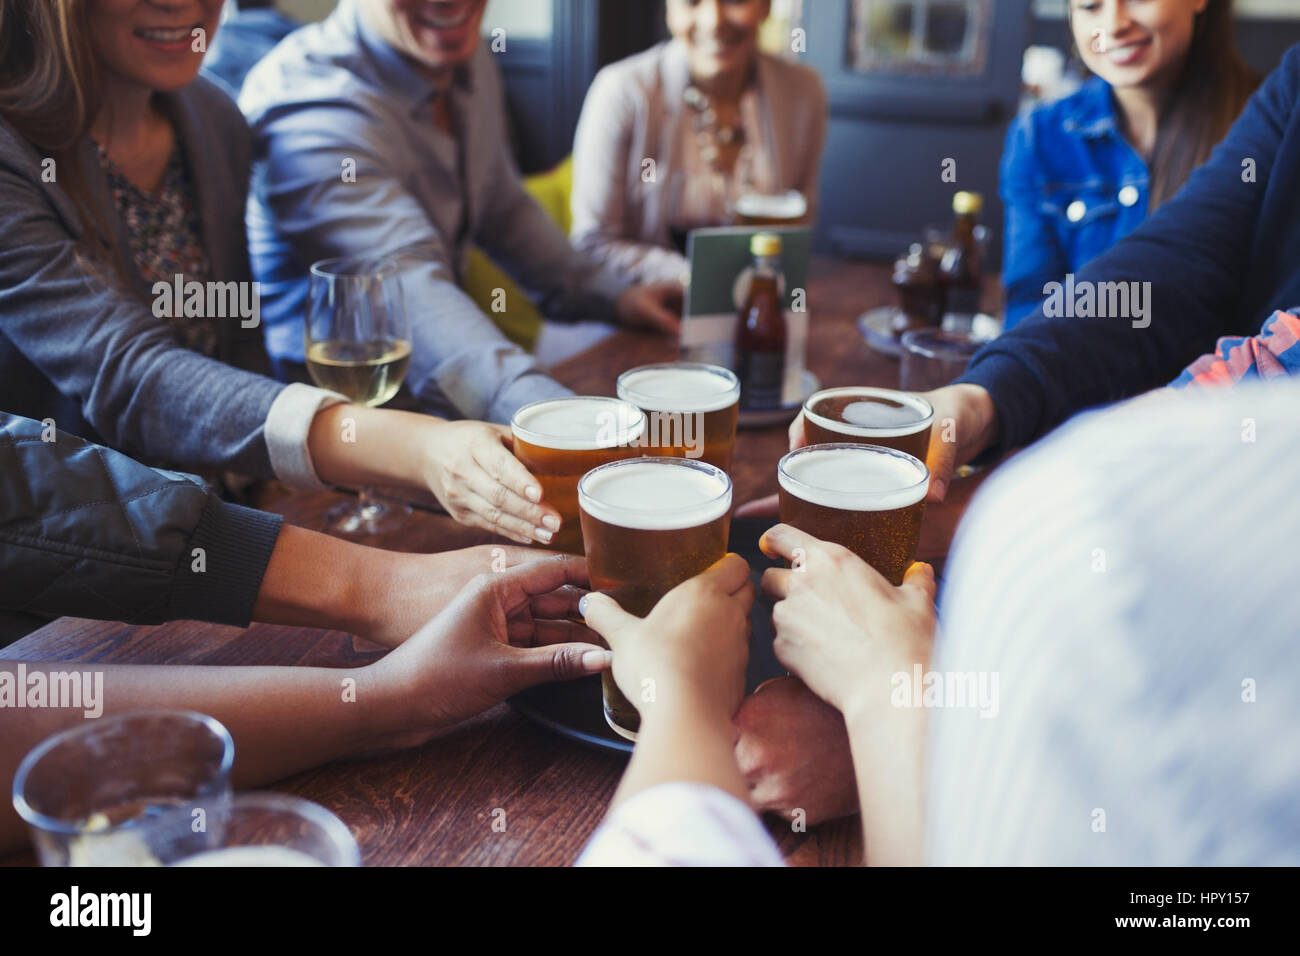 Friends reaching for beer glasses on bar table Stock Photo